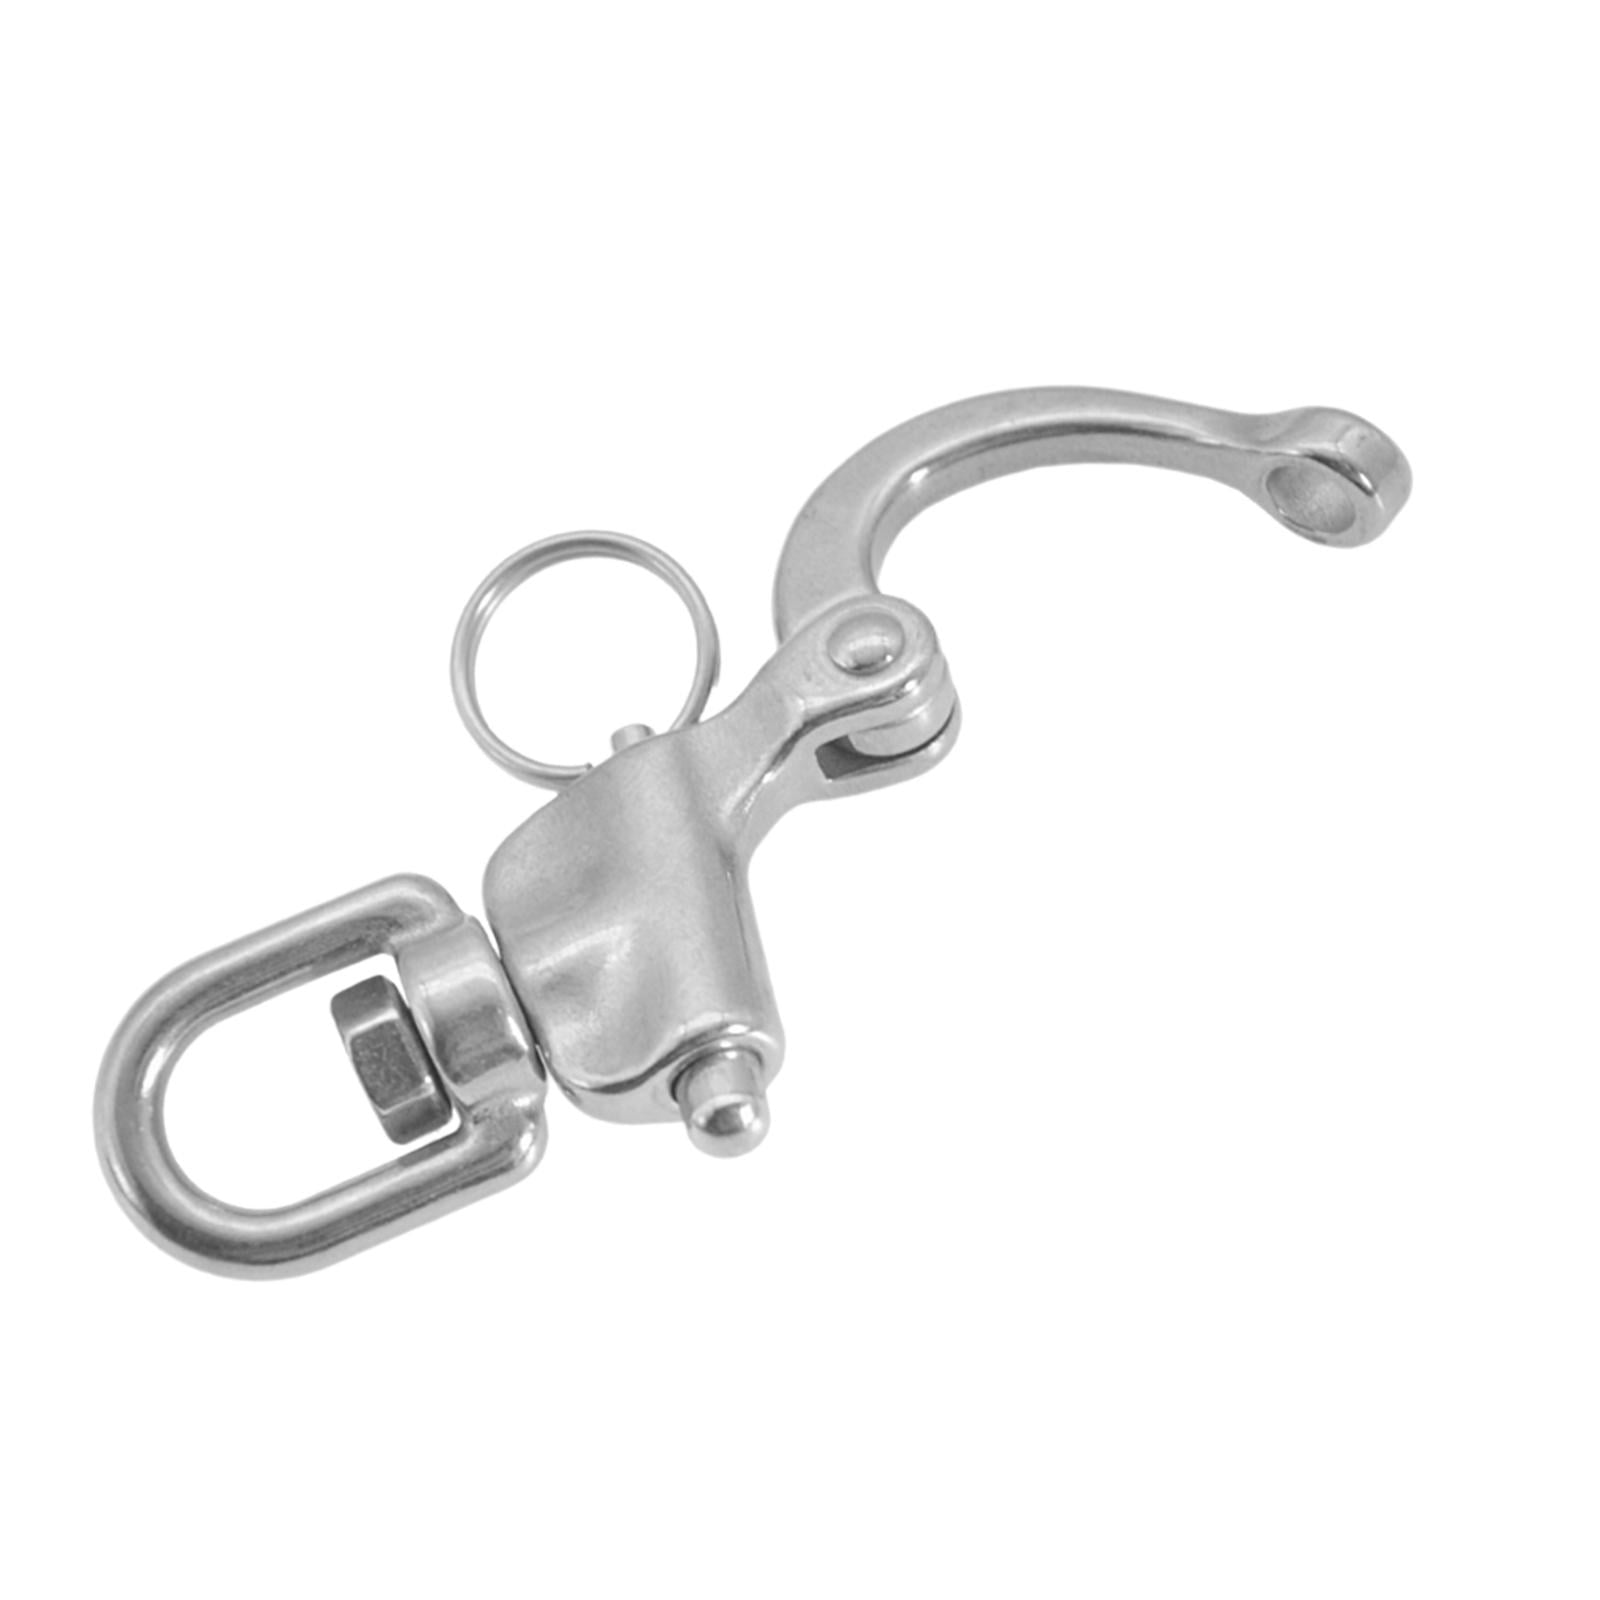 Swivel Eye Snap Hook Shackles Stainless Steel for Rigging, Water Sports,  Halyard, Boat Accessories, Sailing Fork Type 